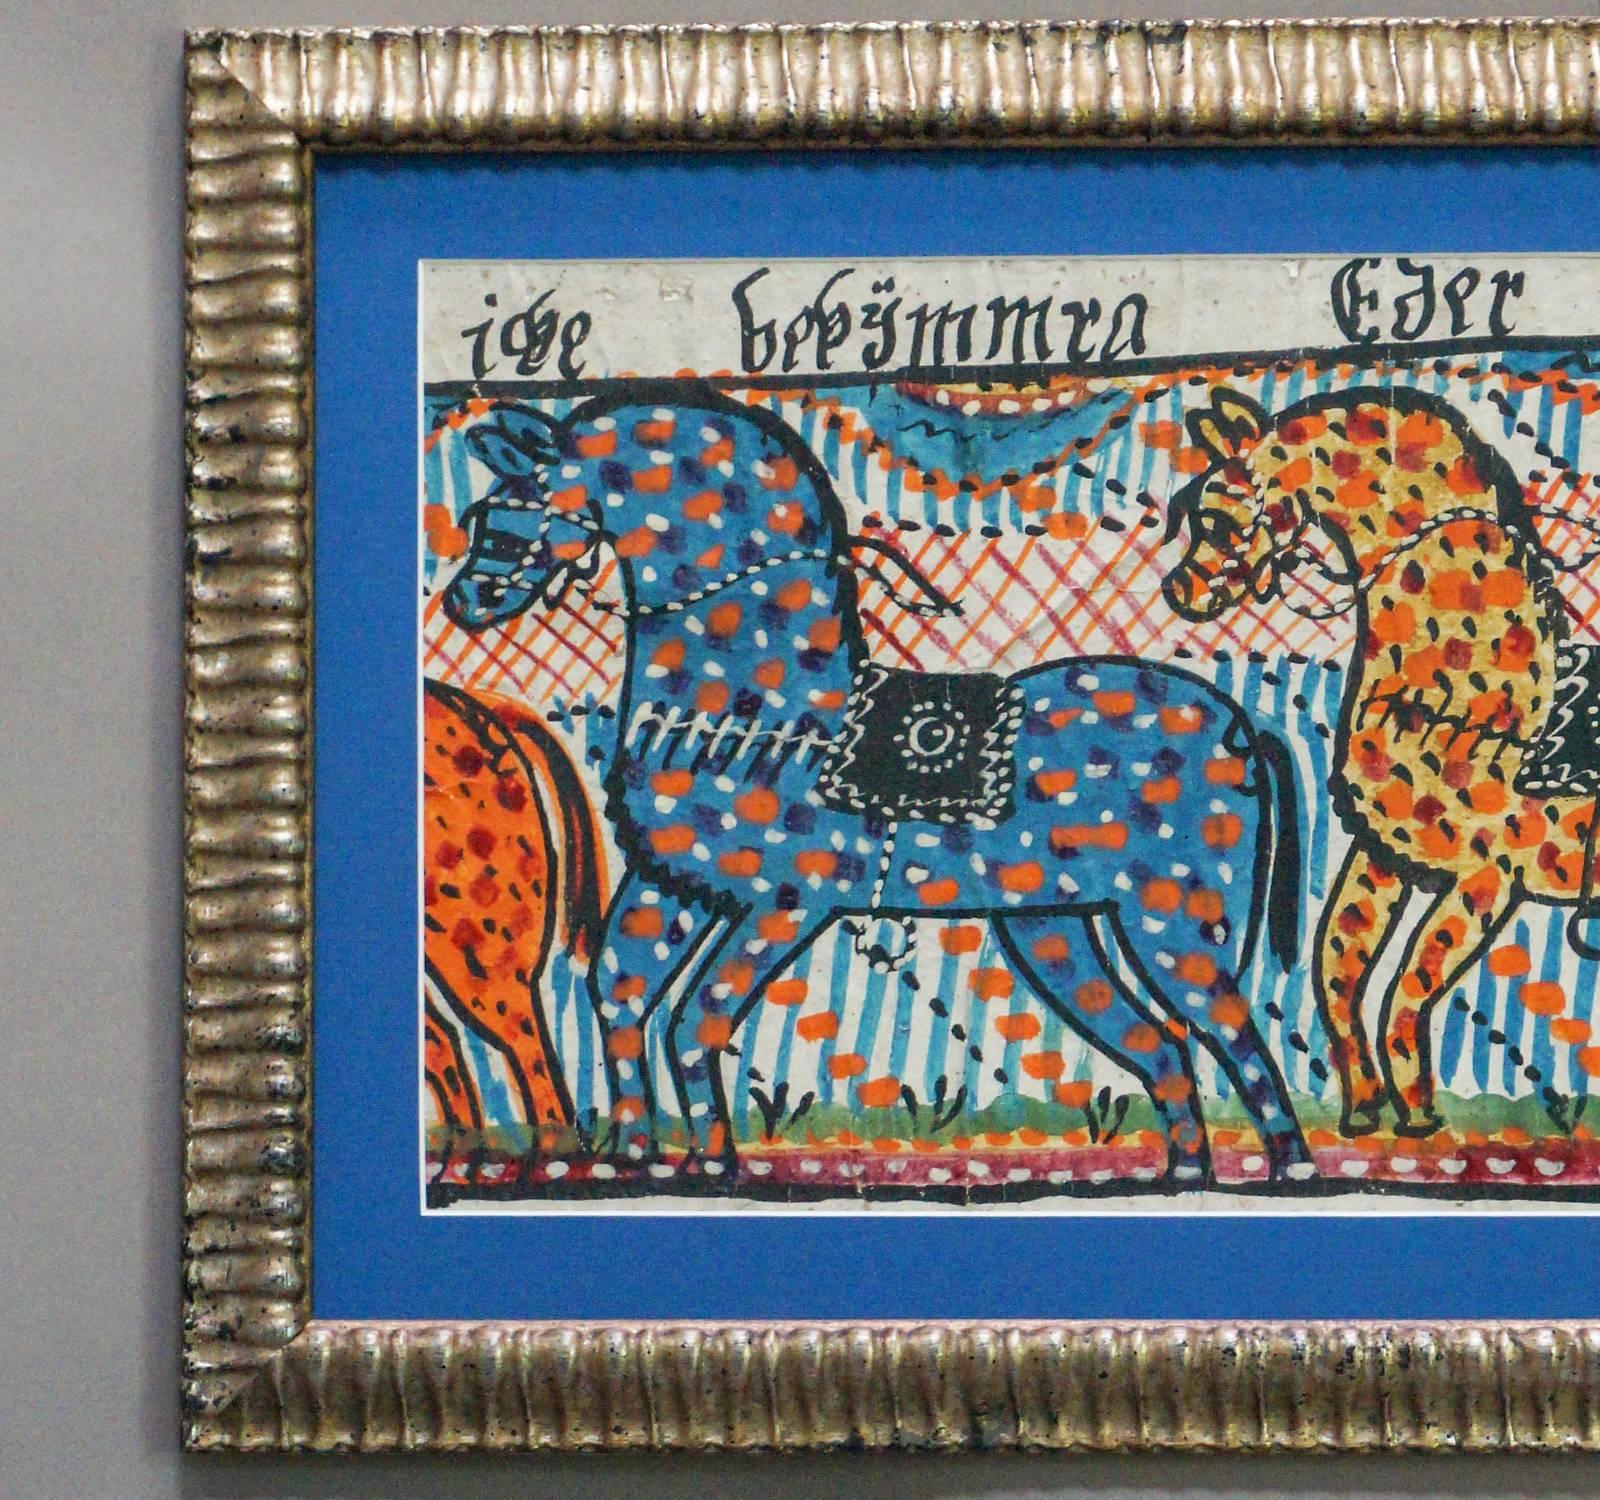 Fragment of larger Swedish bonad illustrating the story of Joseph’s brothers in Egypt (Genesis 42:5-11). Each of the spotted horses is a different color but they are all sporting decorative saddles and bridles. The background is filled with typical